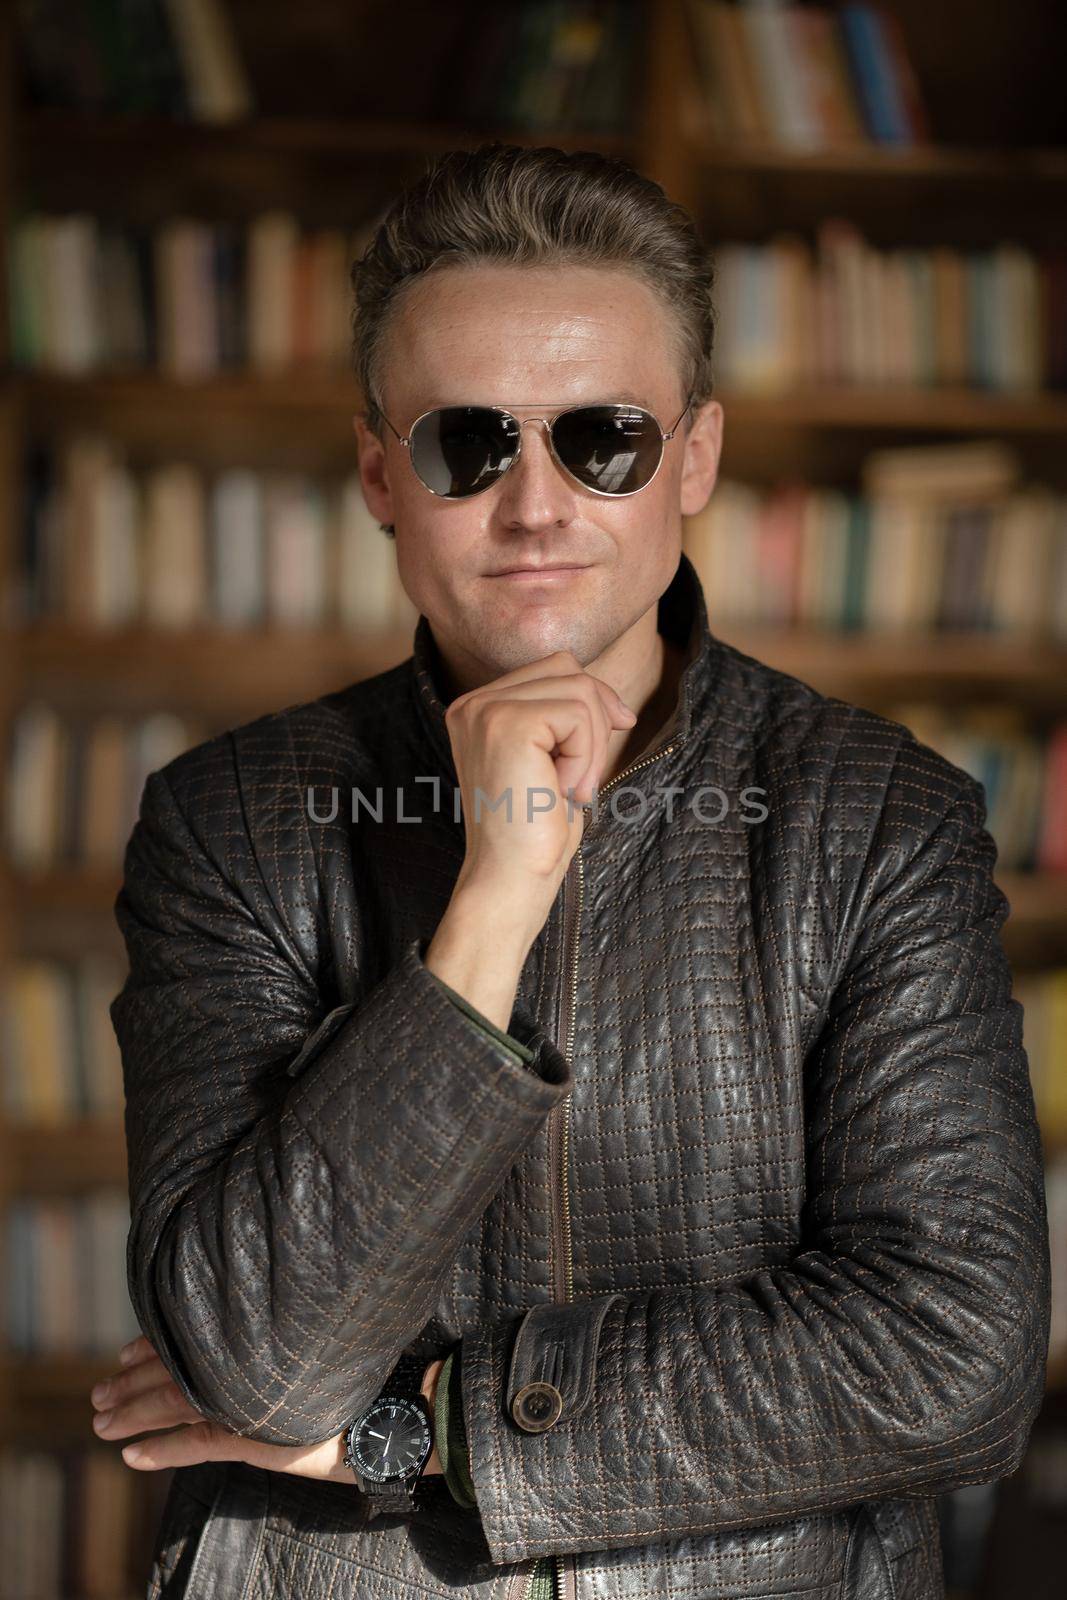 Brutal Fair-haired Guy in Modern Sunglasses Posing in his Business Office .White Man in Lather Jacket. Close-up Portrait. Book Shelves Background. High quality photo